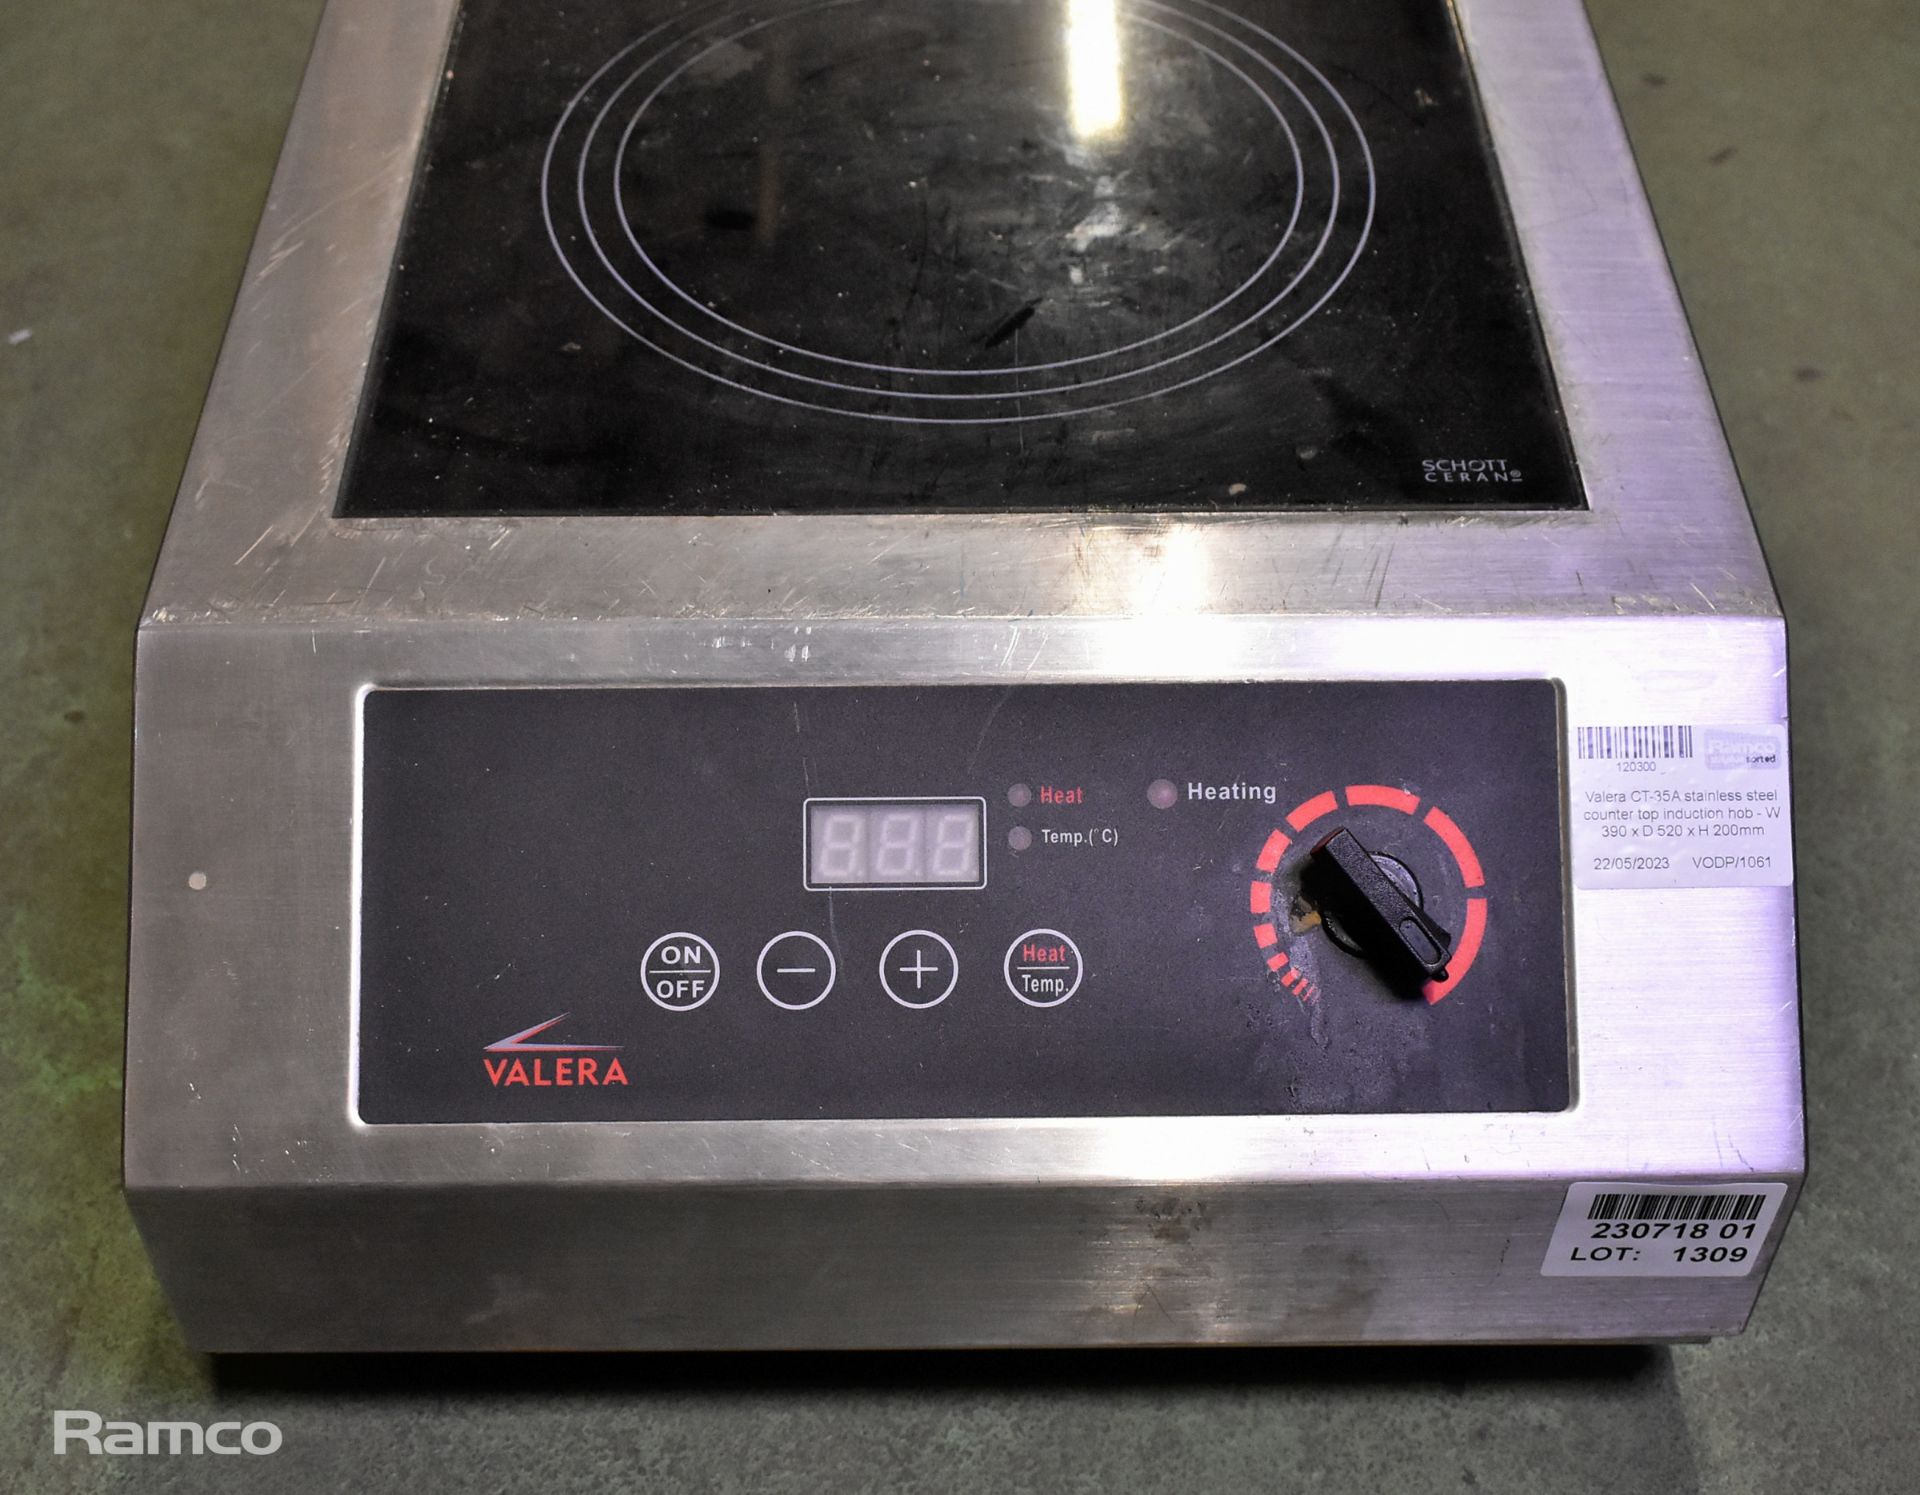 Valera CT-35A stainless steel counter top induction hob - W 390 x D 520 x H 200mm - Image 2 of 7